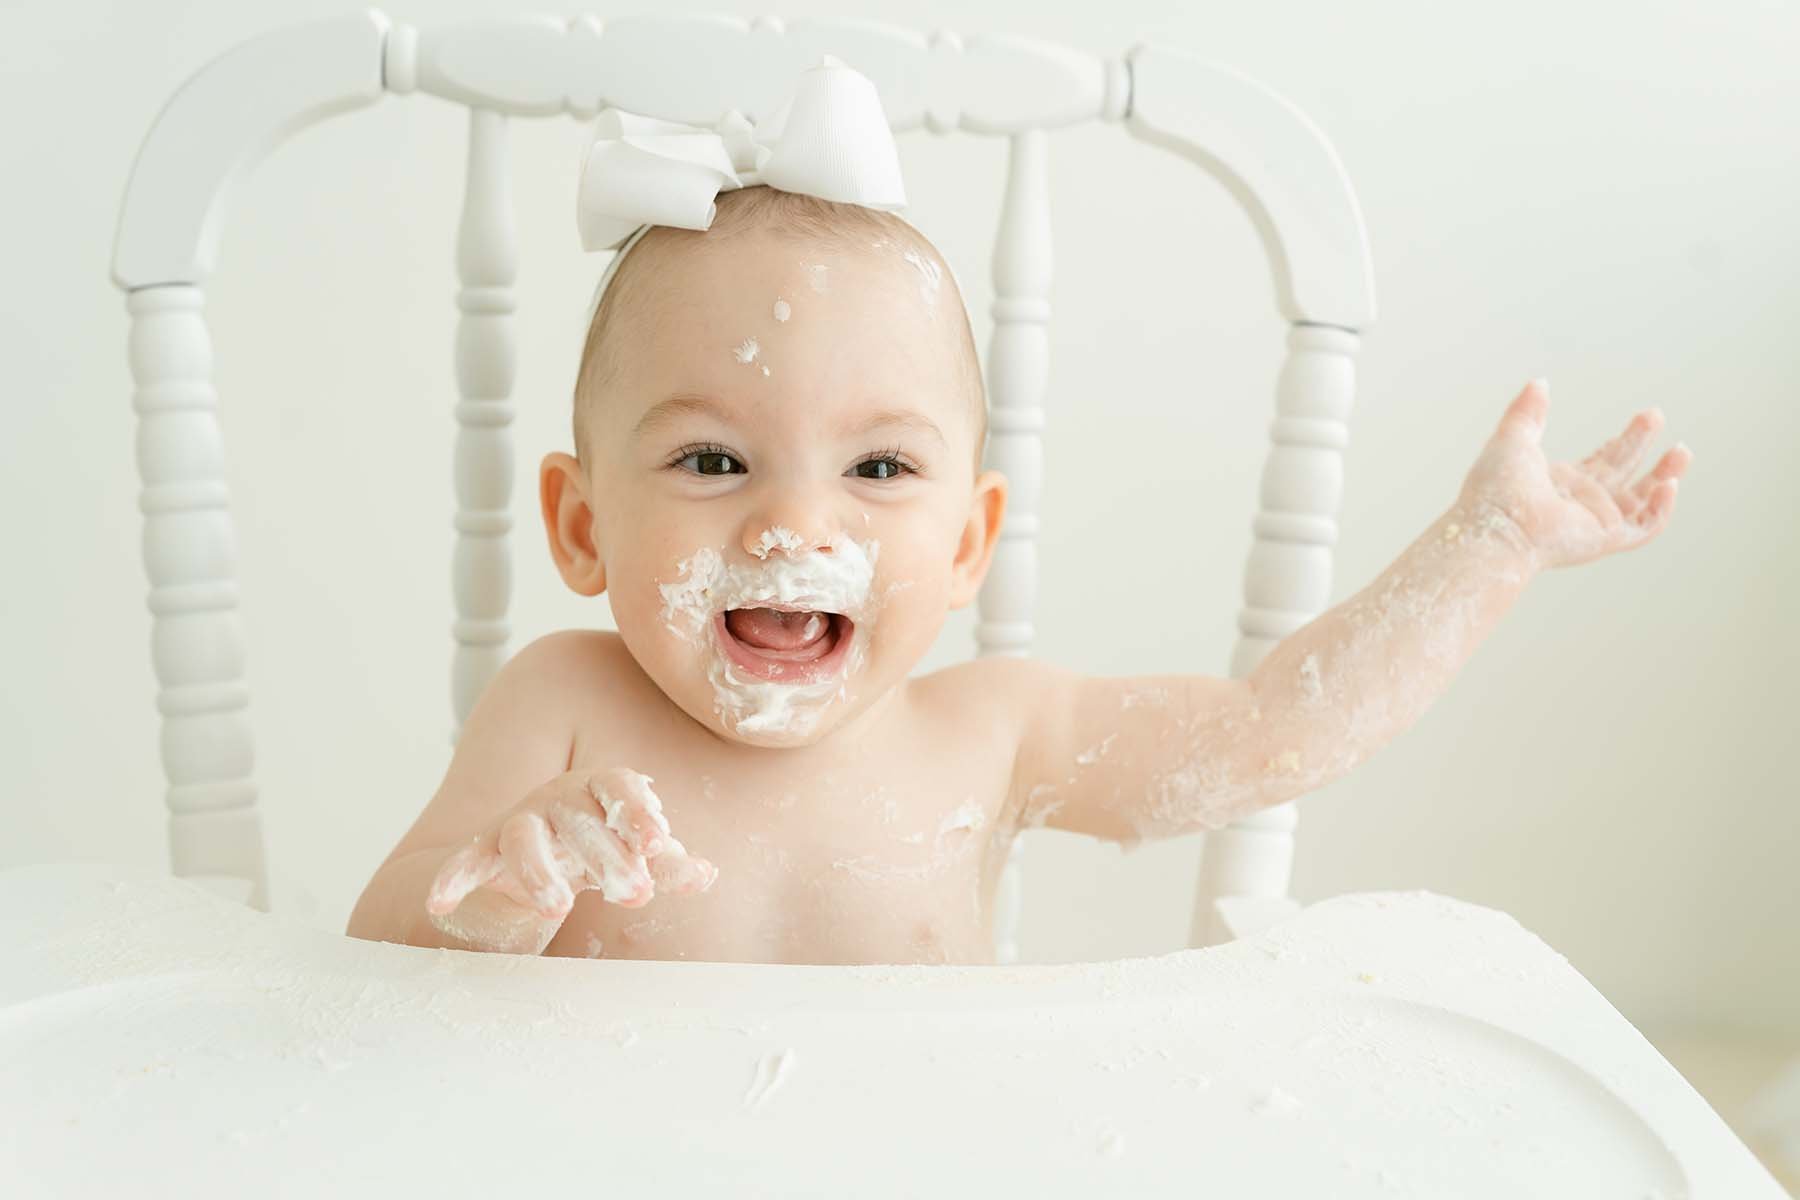 One year old baby laughs while throwing birthday cake during cake smash photo shoot at Julie Brock Photography Studio in Louisville KY